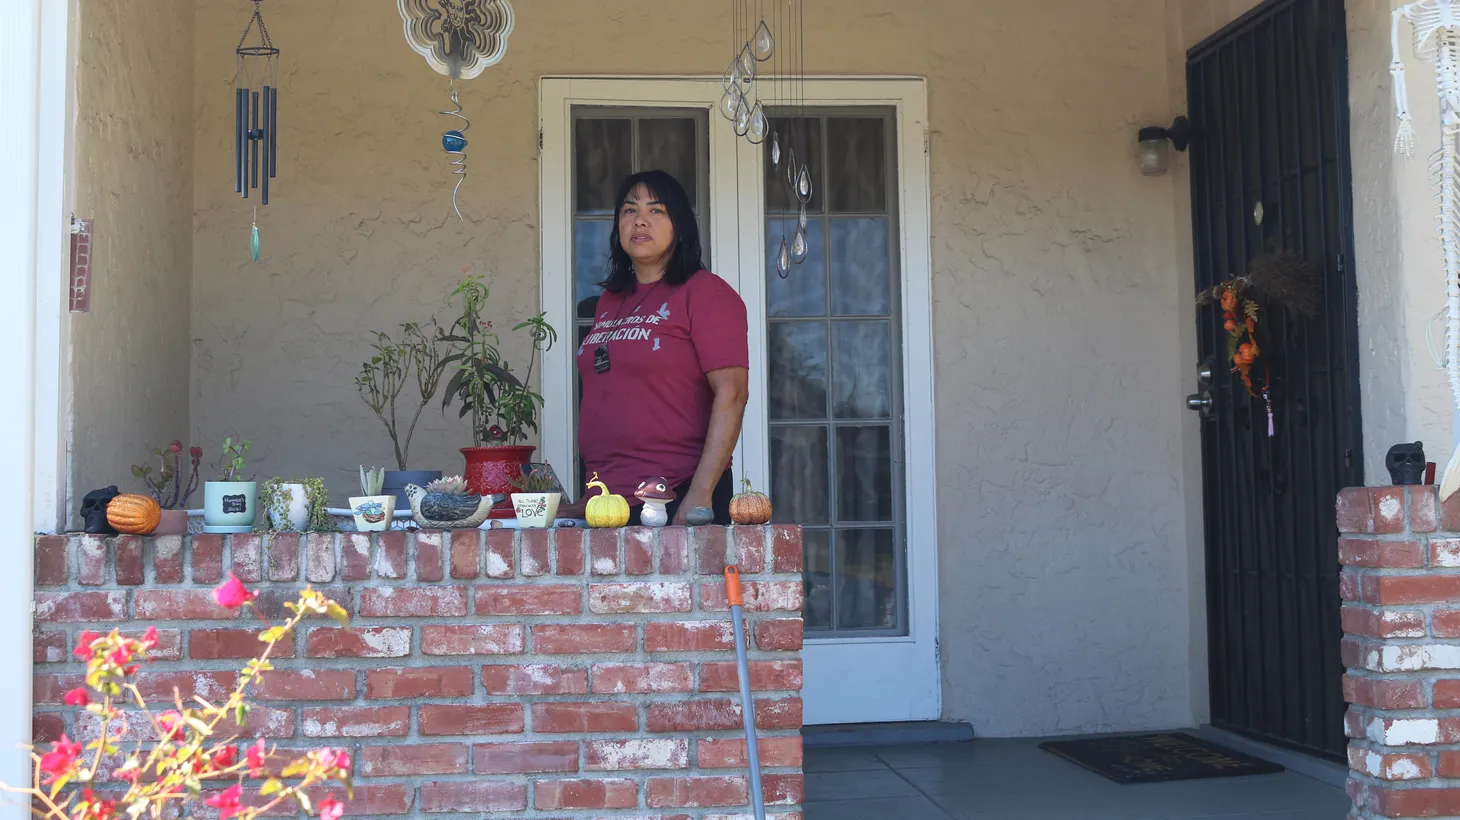 In 2020, a group of unhoused and housing-insecure Angelenos occupied vacant state-owned homes in El Sereno like this one, where Martha Escudero lives with her two children. She’s now facing eviction.